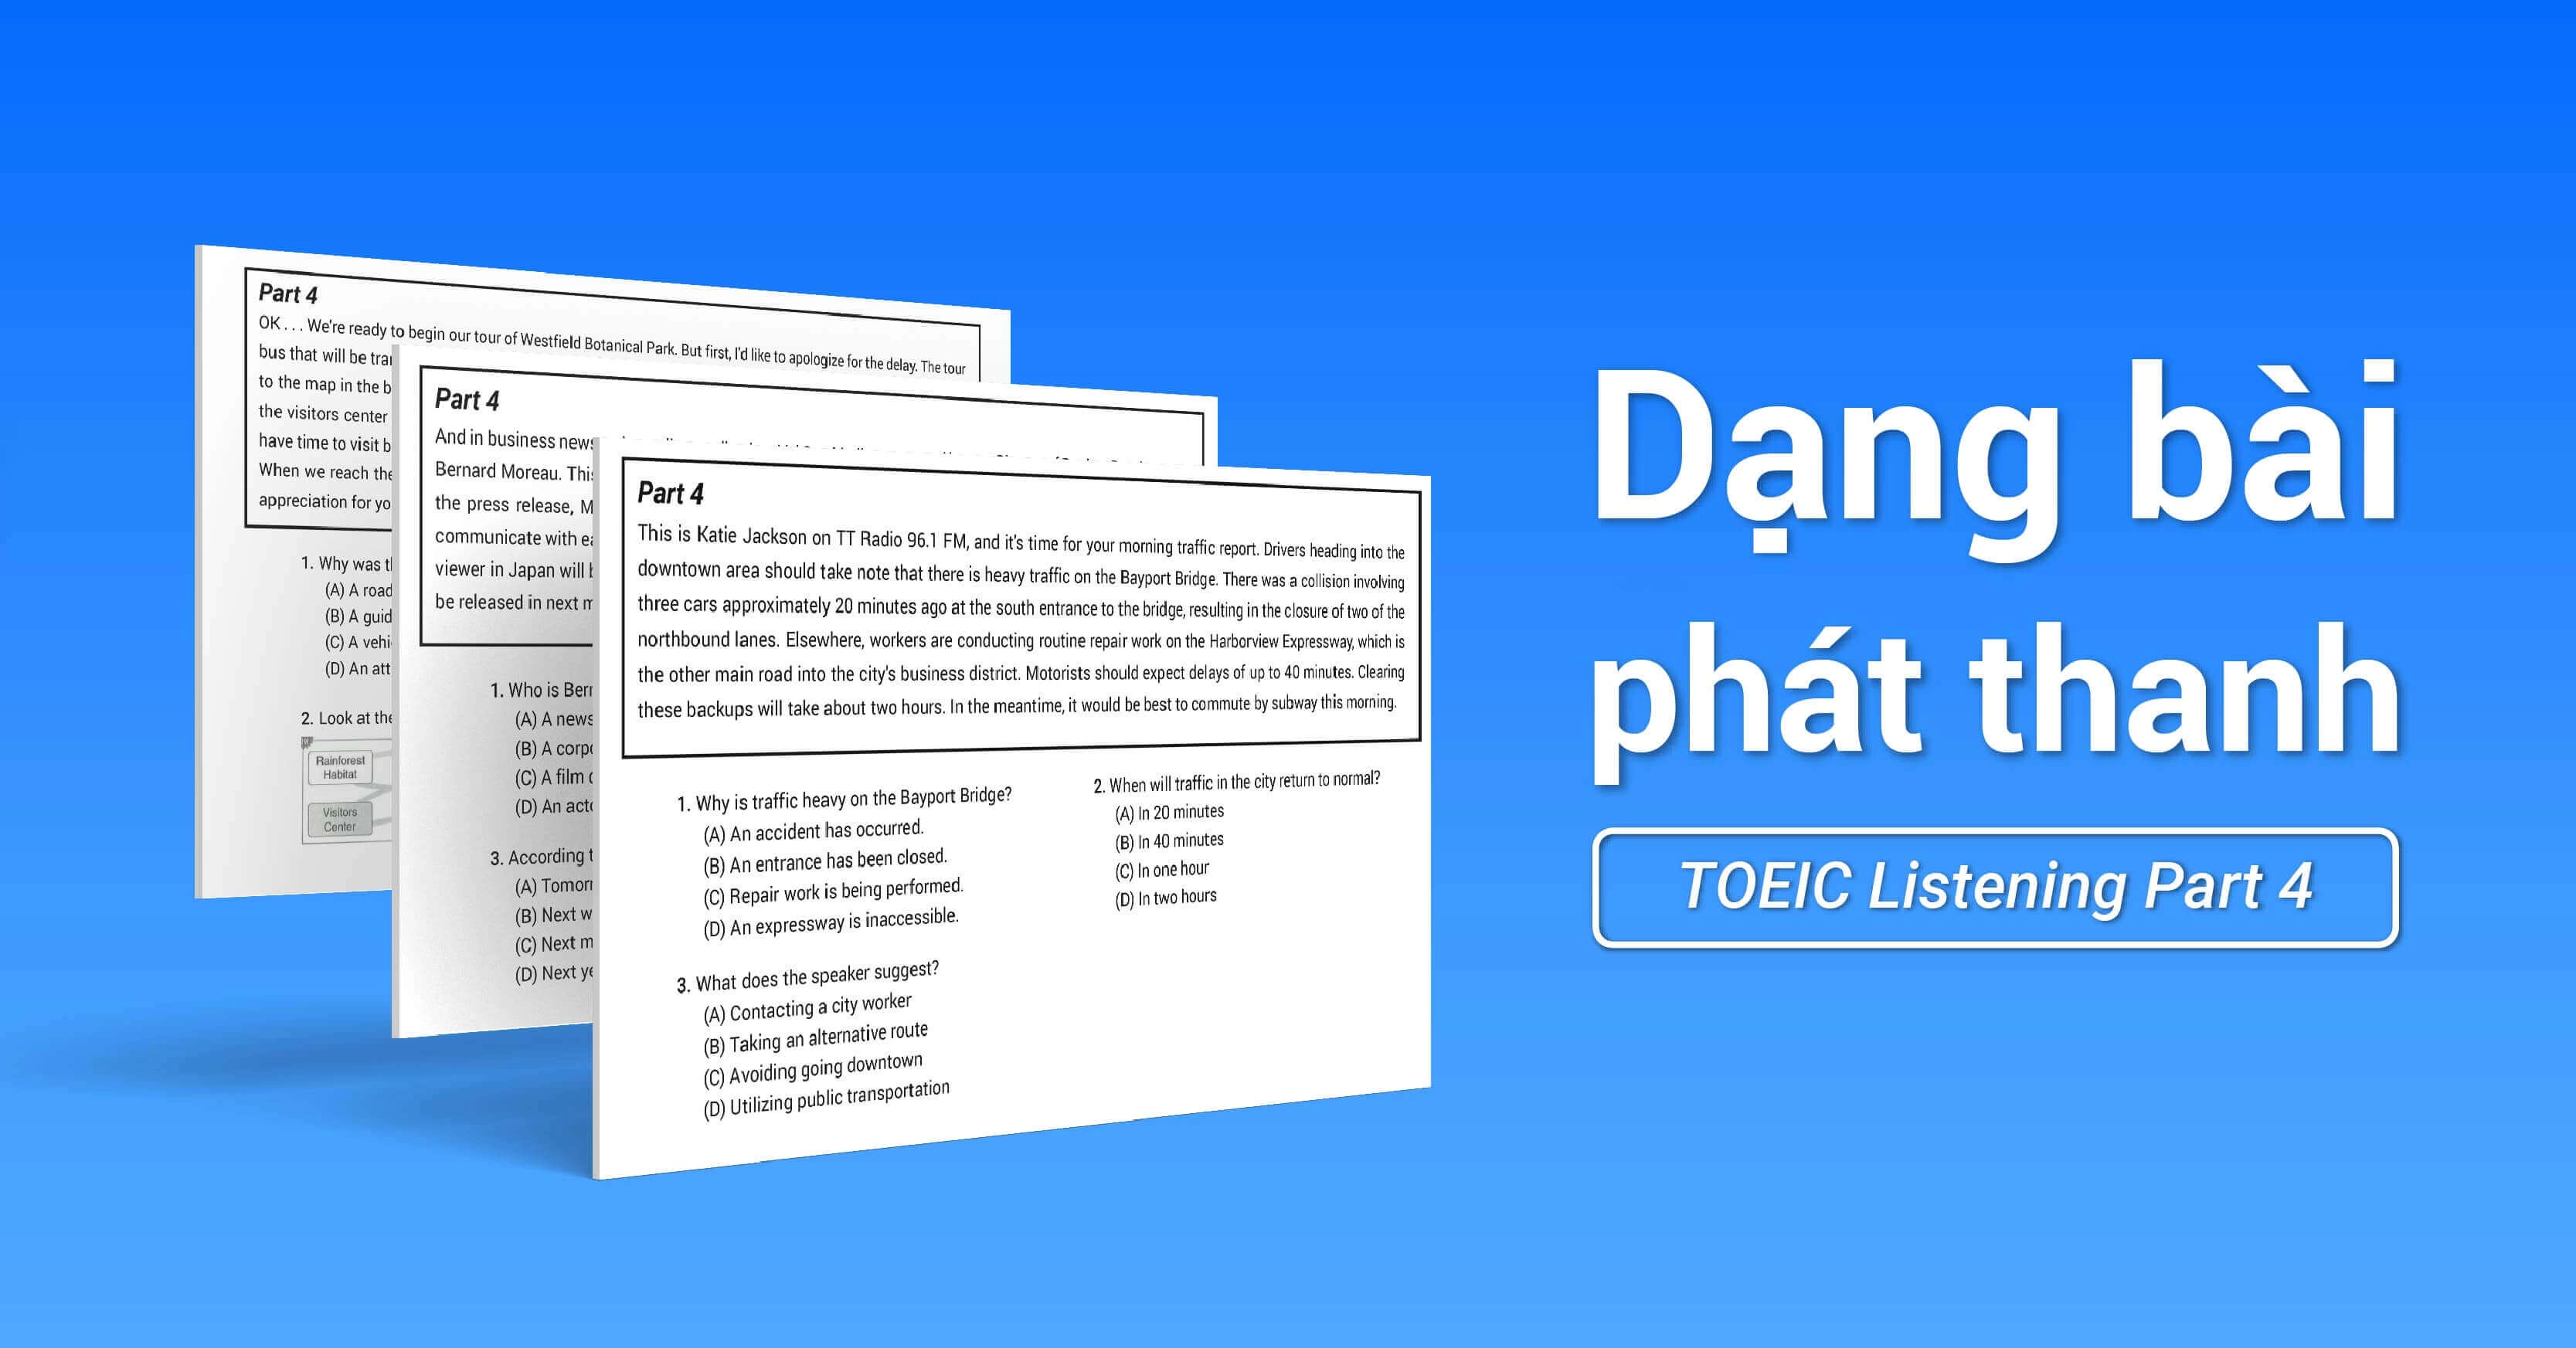 cach-lam-dang-bai-phat-thanh-broadcasts-trong-toeic-listening-part-4-